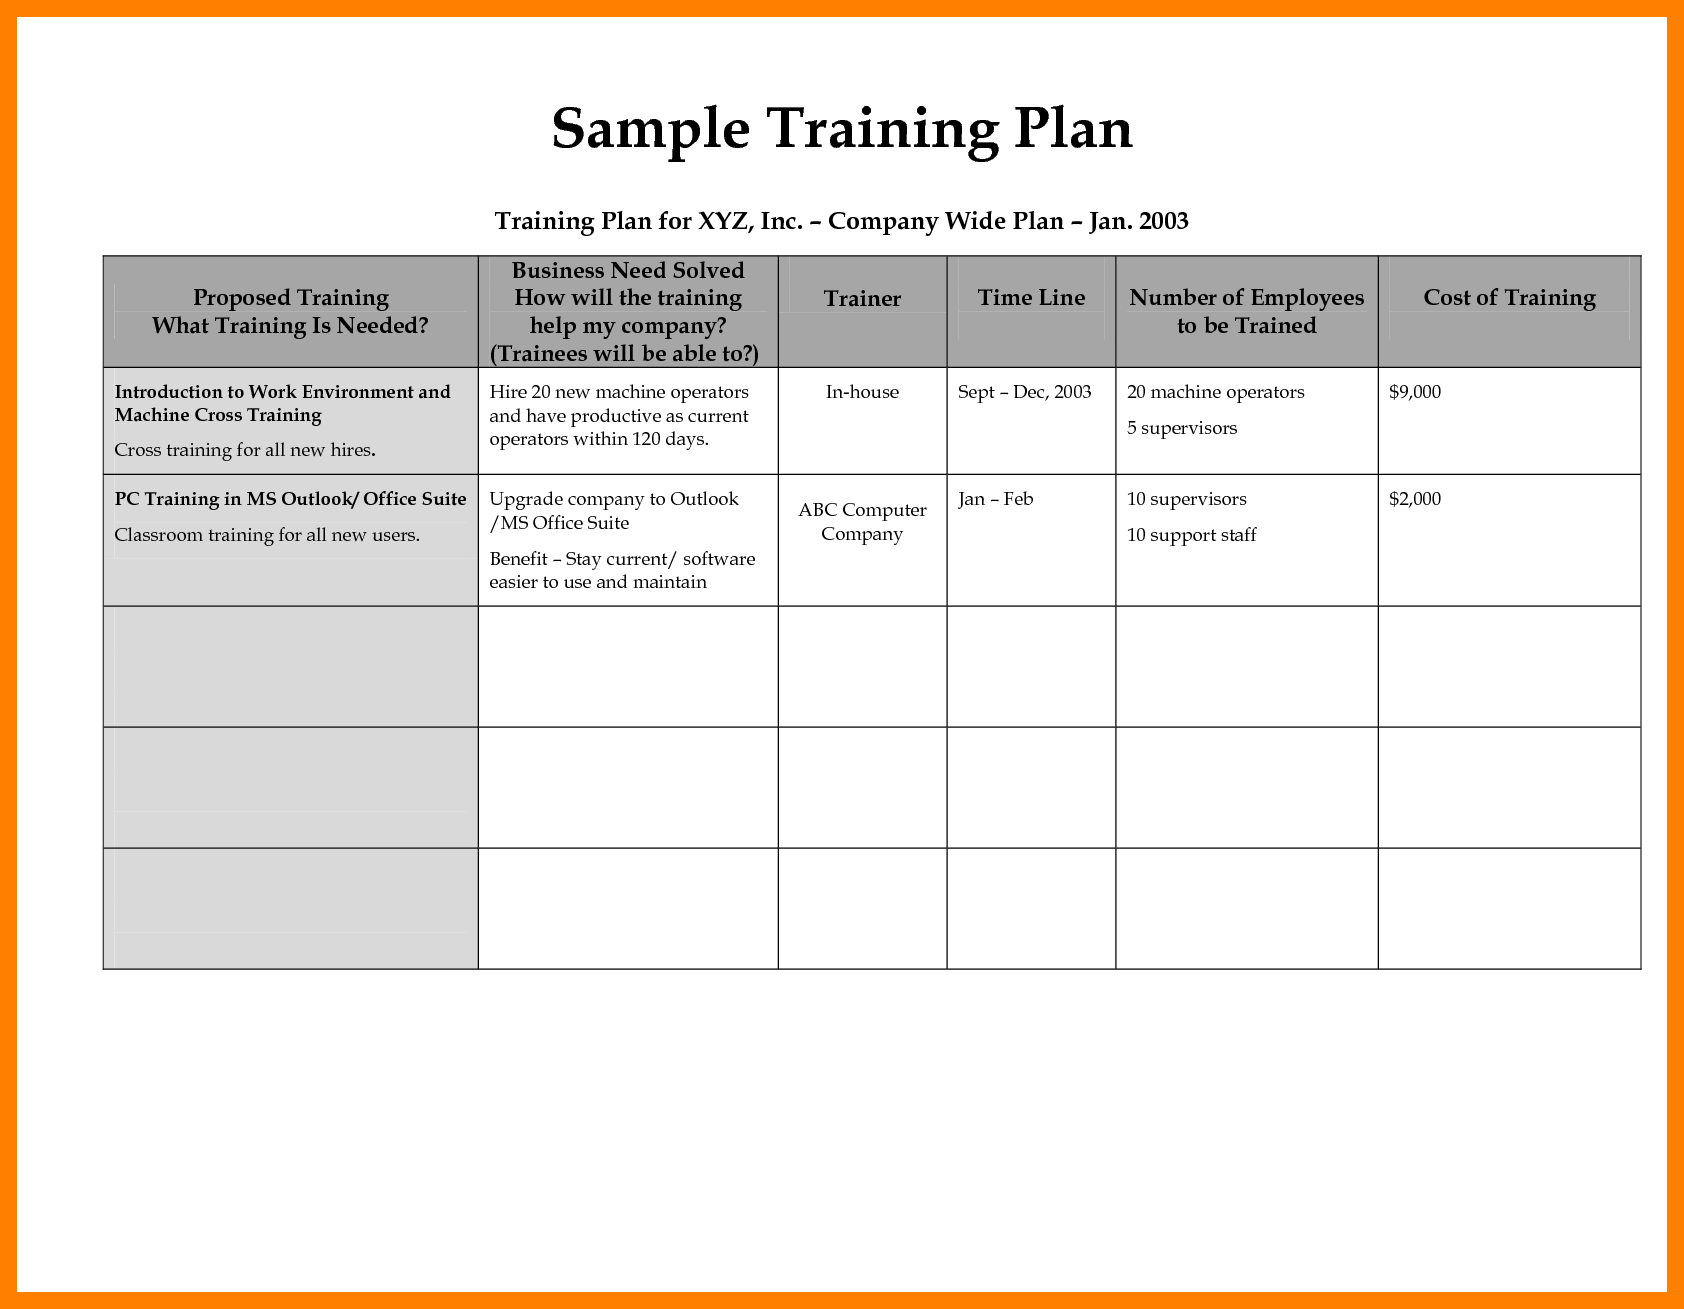 Here is a Training Schedule template example that I created for 